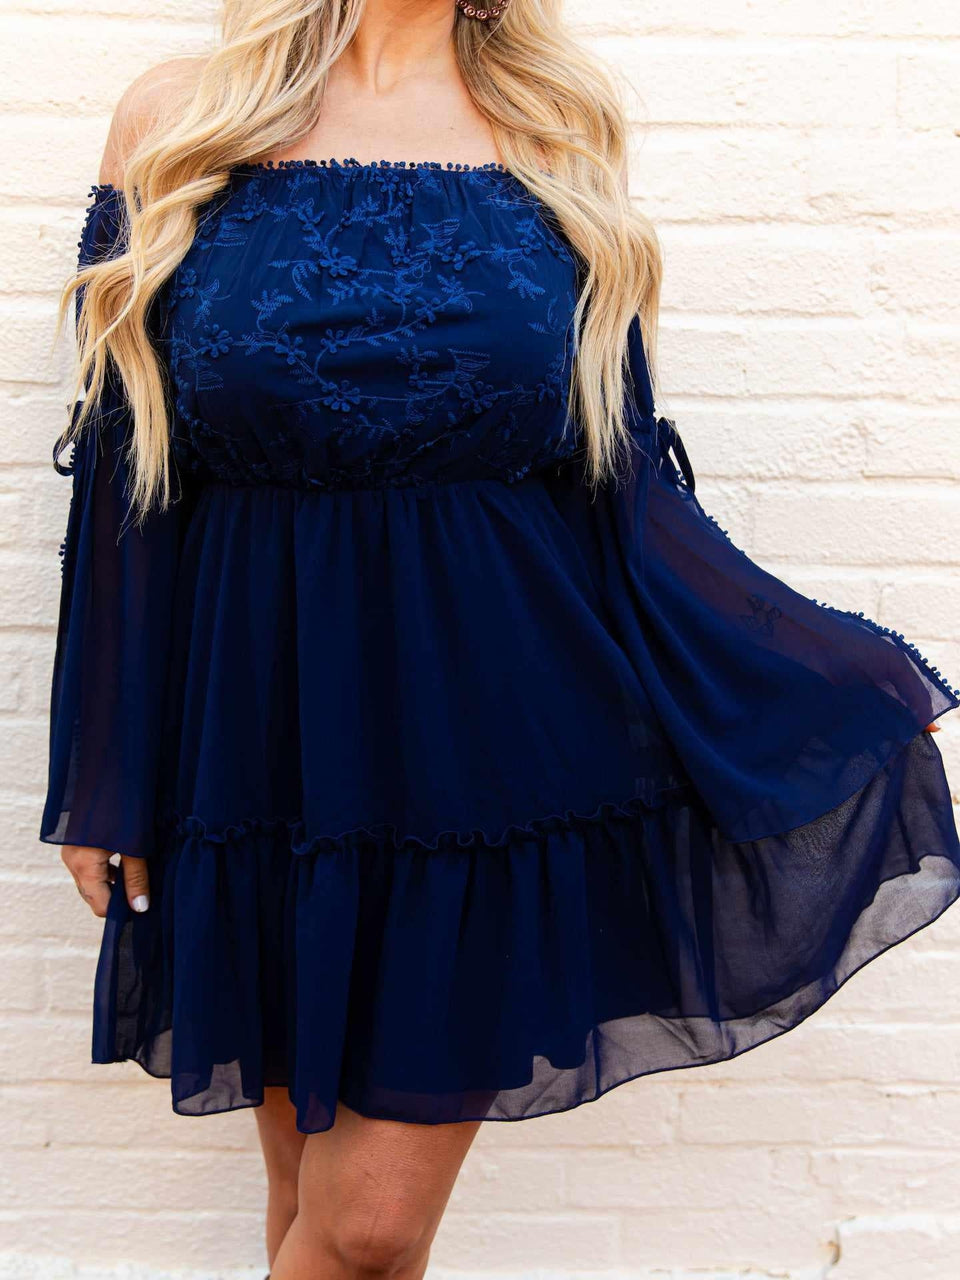 Cheerful Wishes Dress - Navy Blue-Dresses-Southern Fried Chics